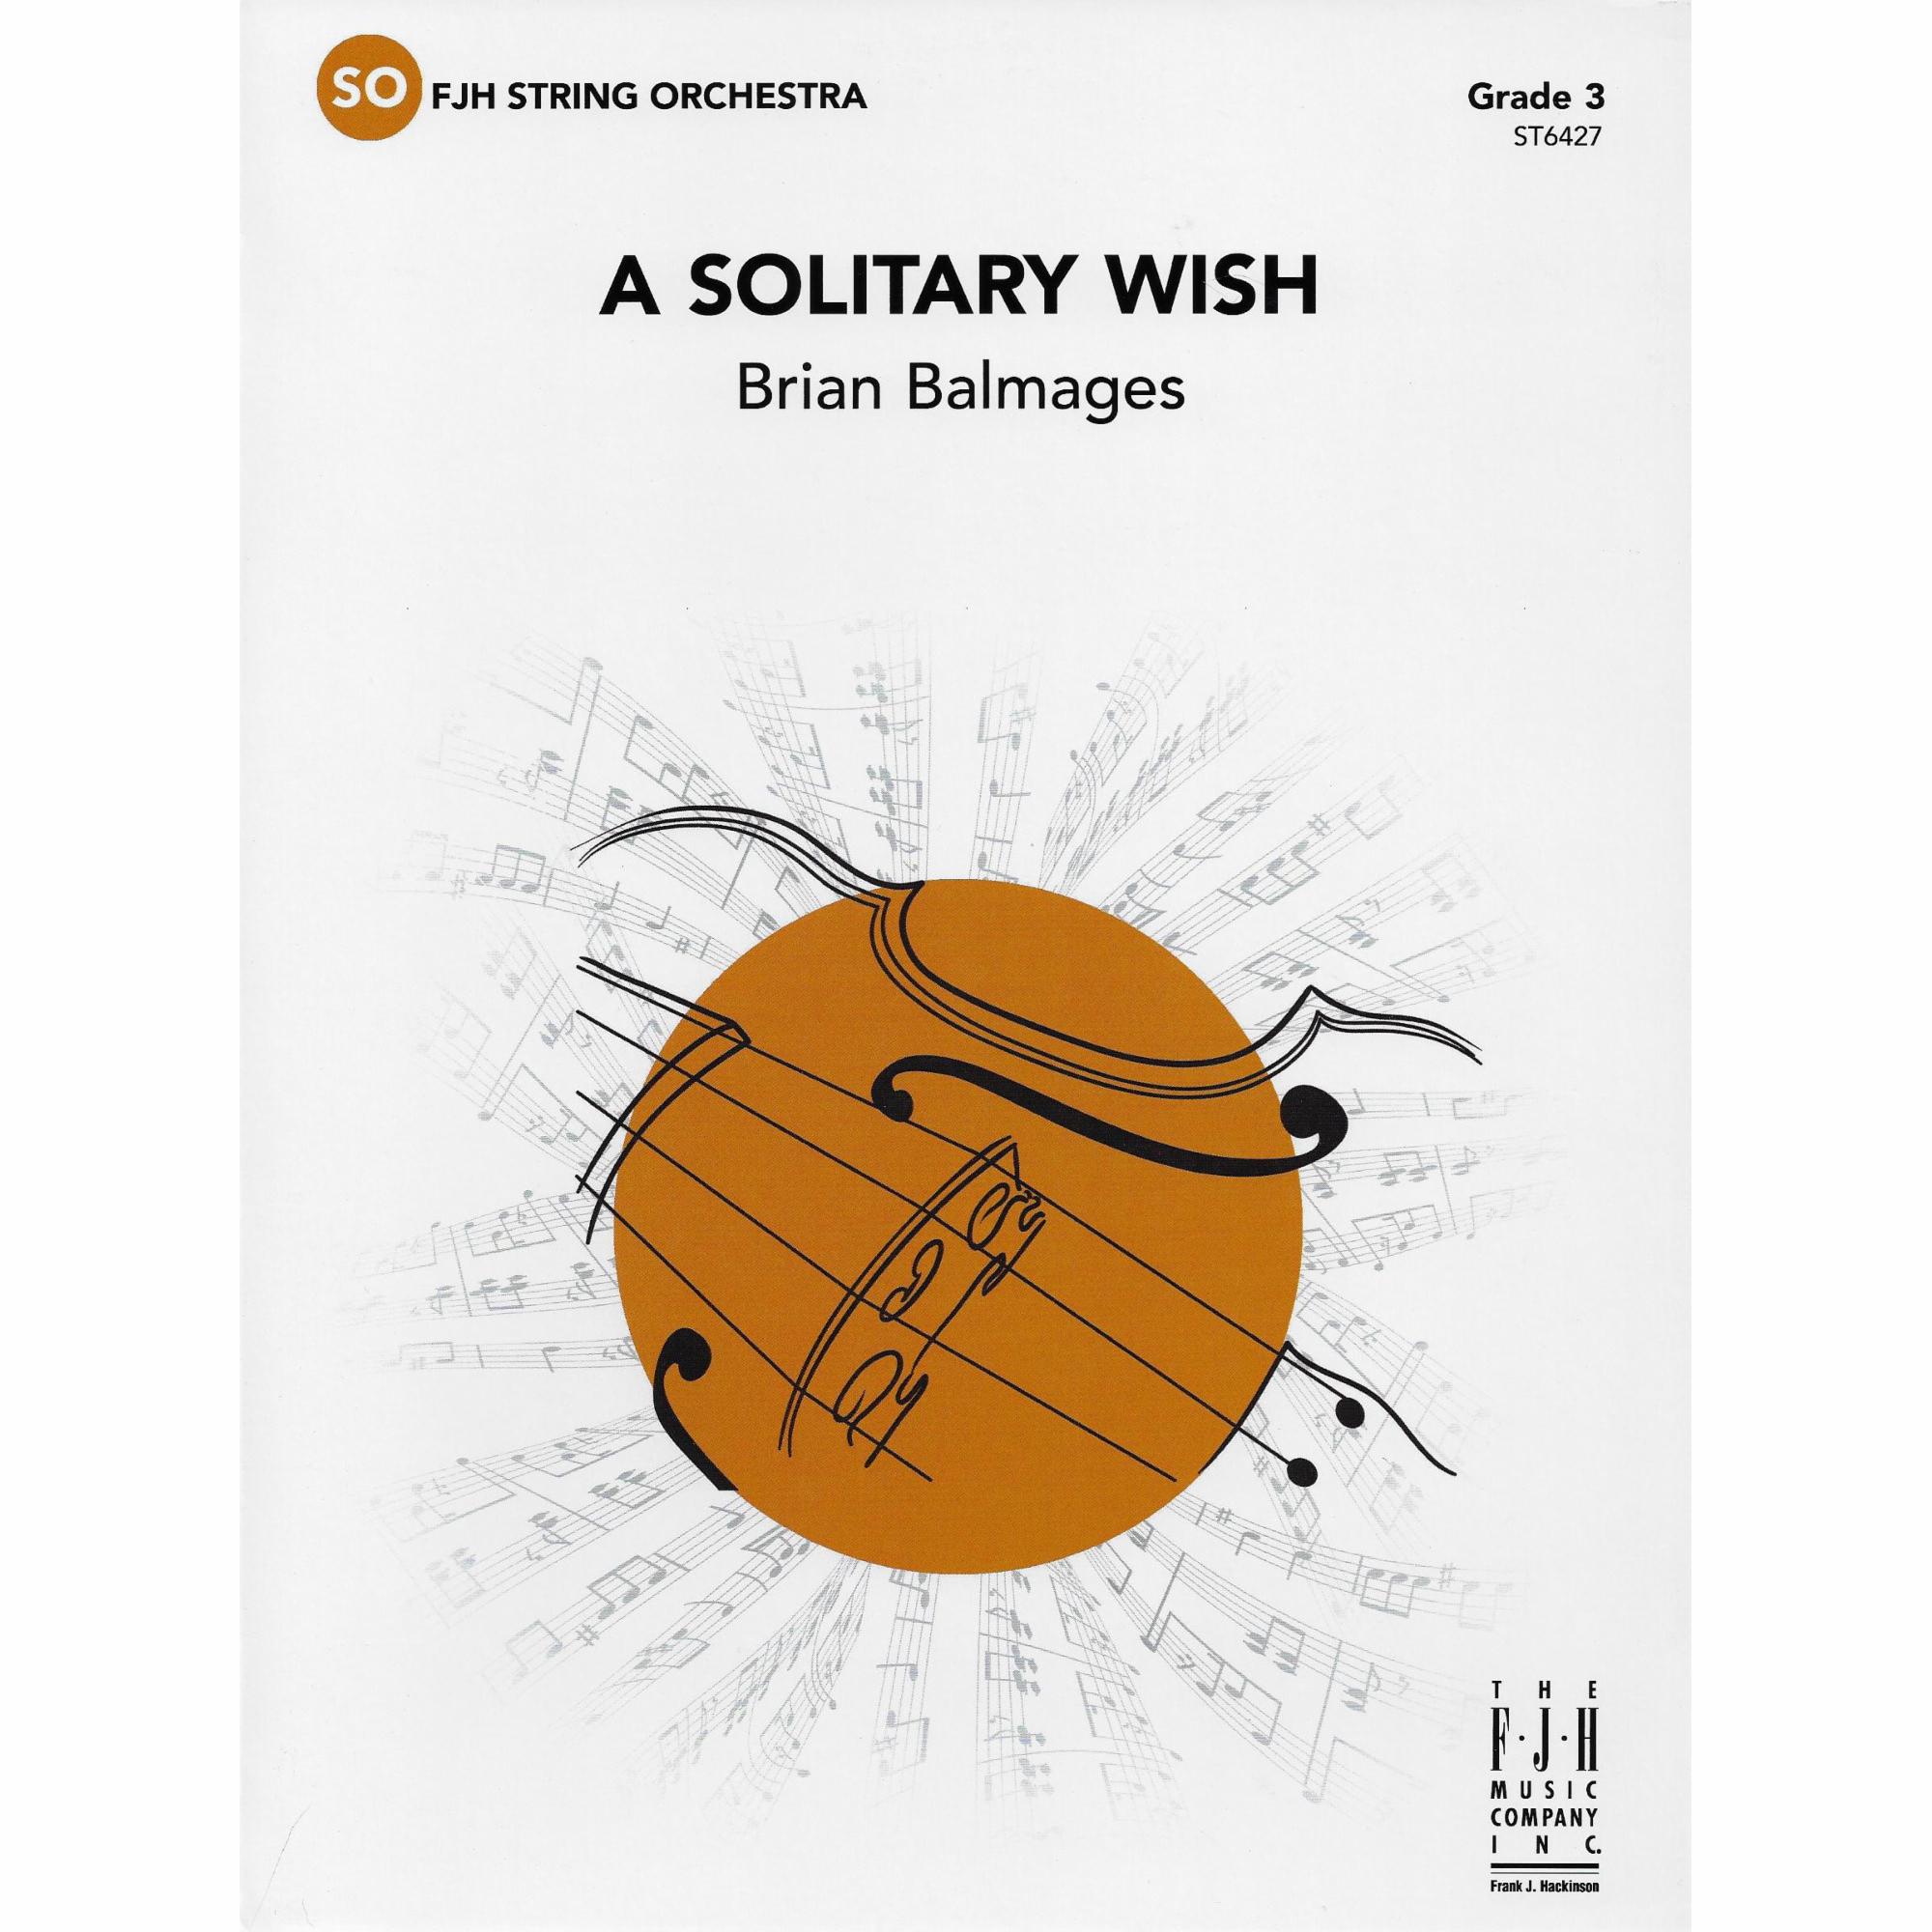 A Solitary Wish for String Orchestra